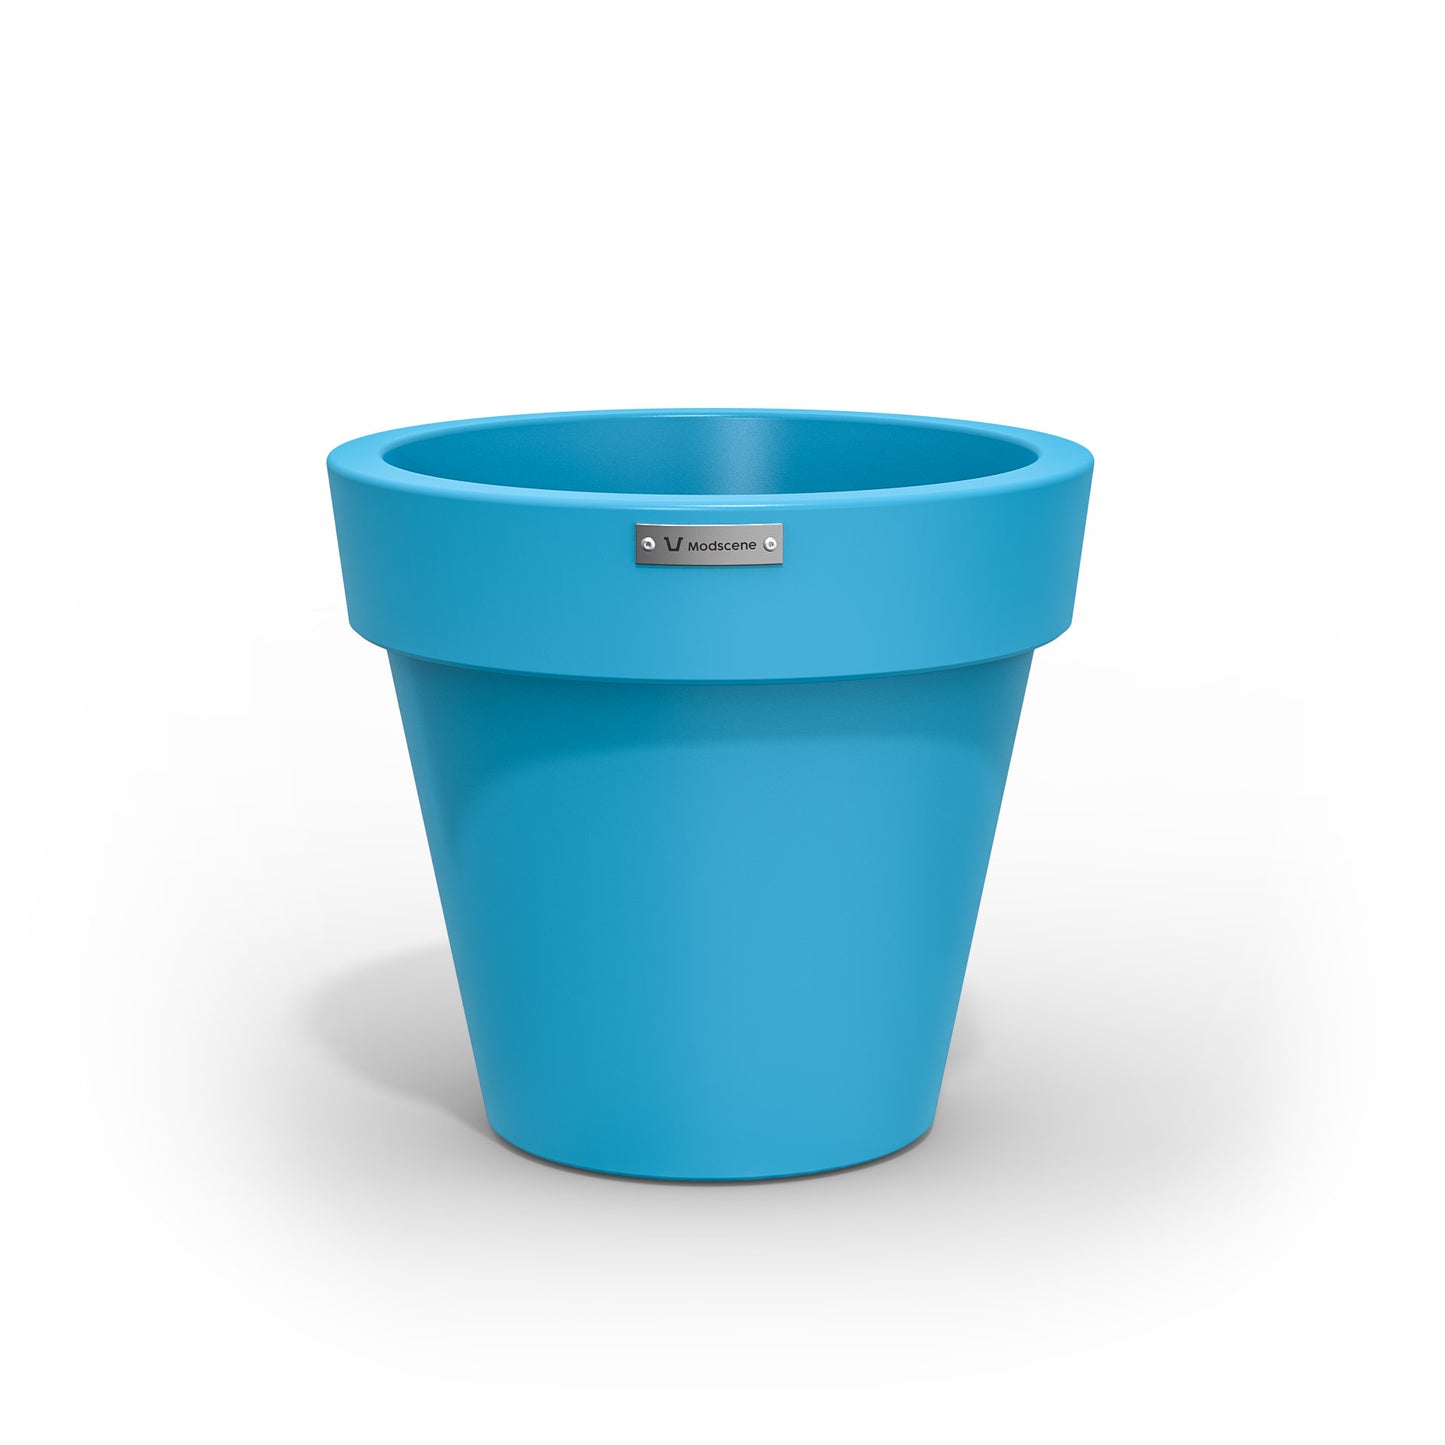 A small blue planter pot made by Modscene.